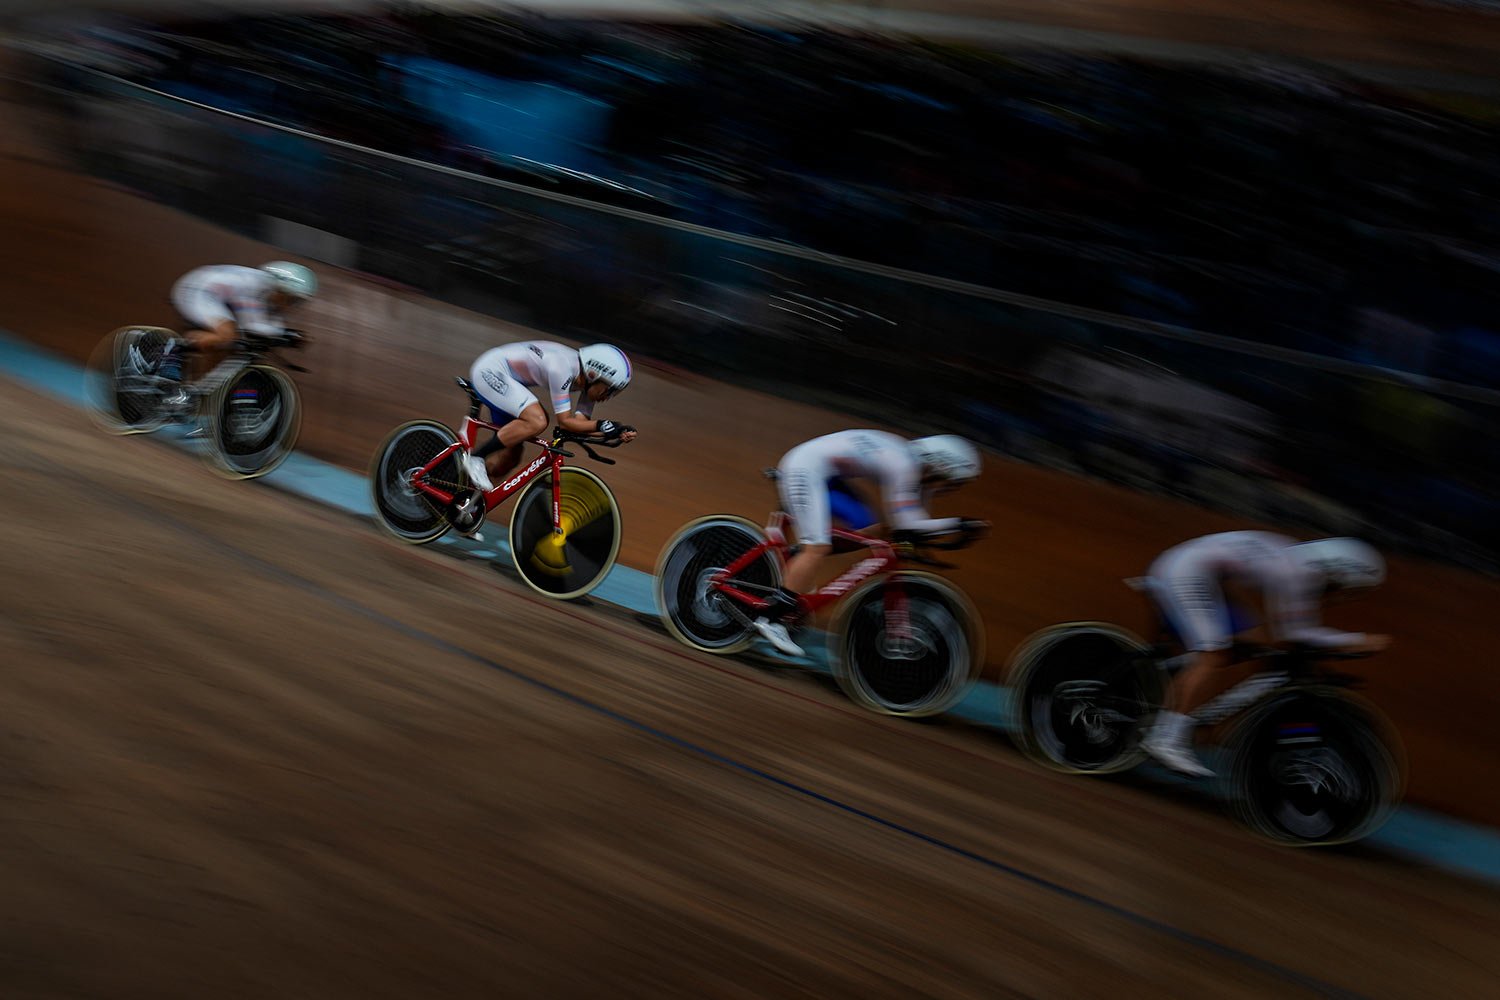  Riders of South Korea compete in the Elite Women's Team Pursuit qualifying round at the Asia Track Cycling Championship in New Delhi, India, Saturday, June 18, 2022. (AP Photo/Altaf Qadri) 